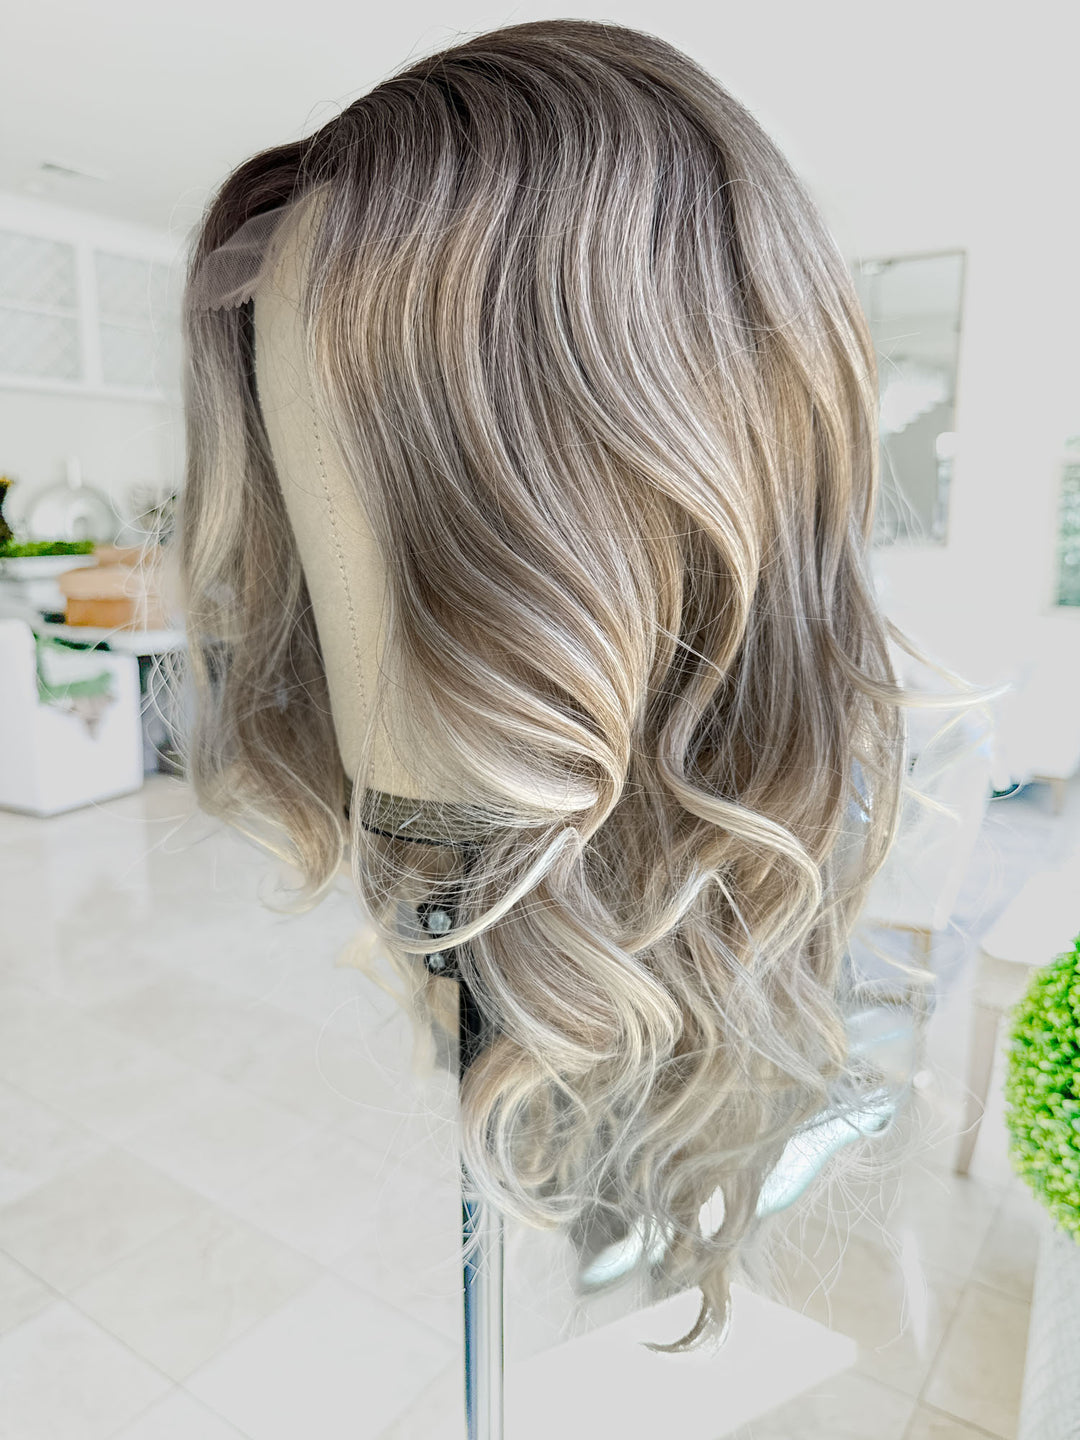 Synthetic Lace Front Wigs |Blonde Lace Front Wig Wavy